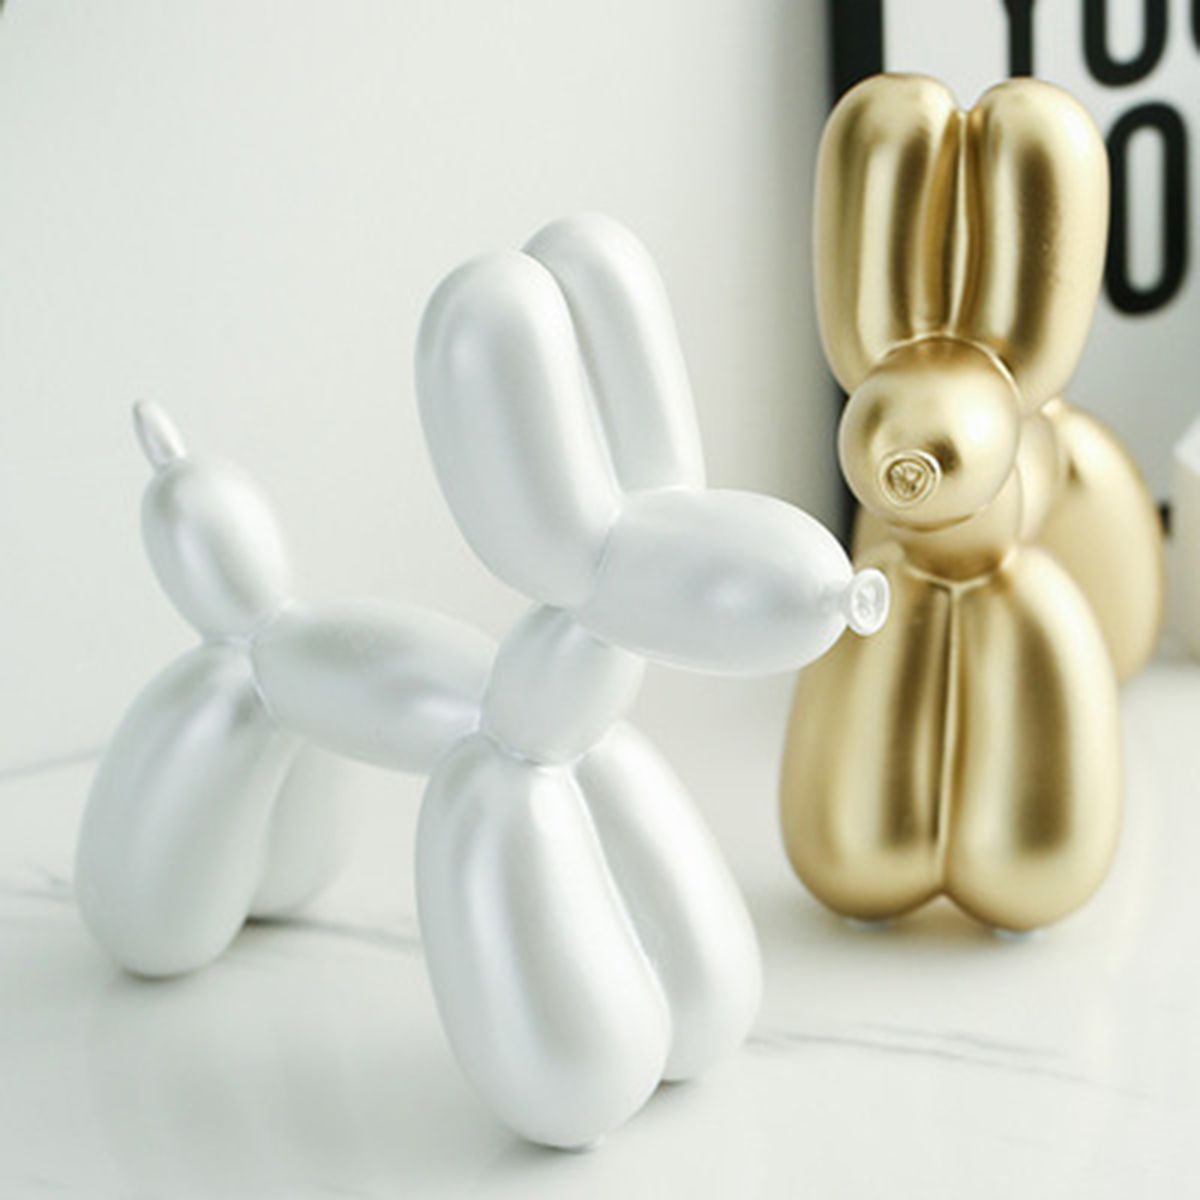 Cute-Resin-Balloon-Dog-Animal-Figurine-Statue-Ornaments-Home-Decorations-1605159